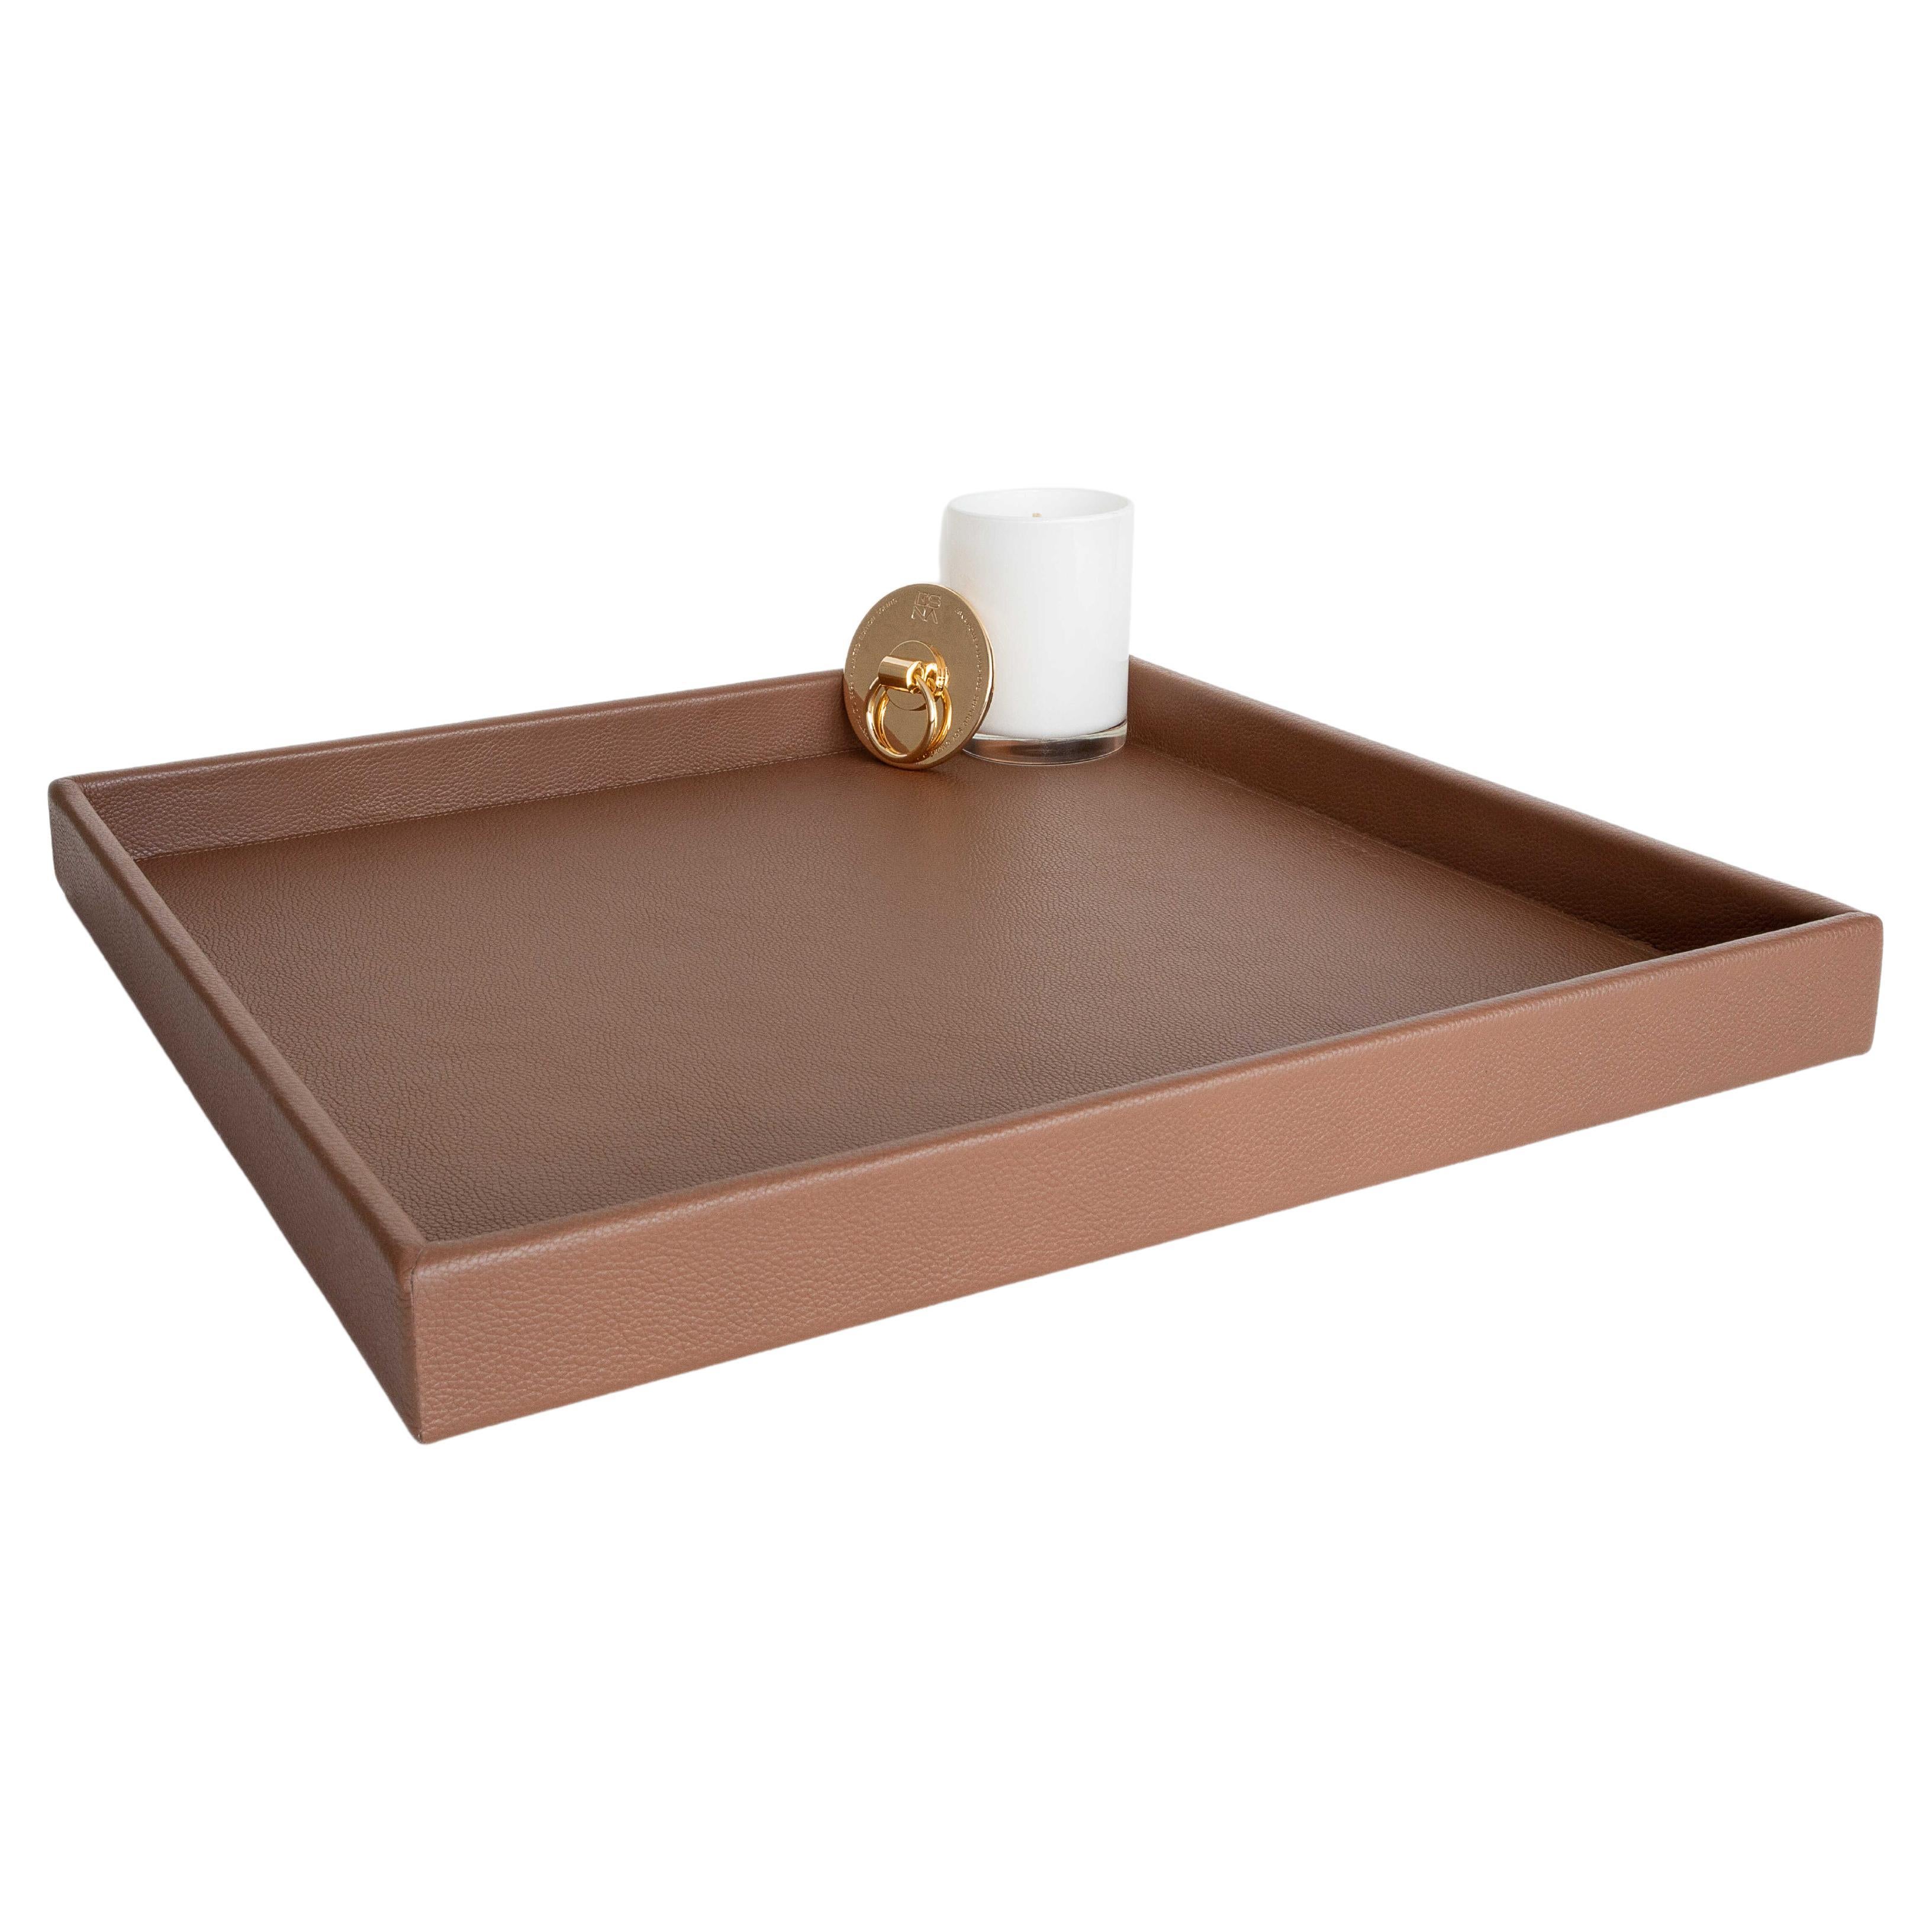 Leather Tray, Large B Square Tray, Handmade in Brazil - Color: Caramel For Sale